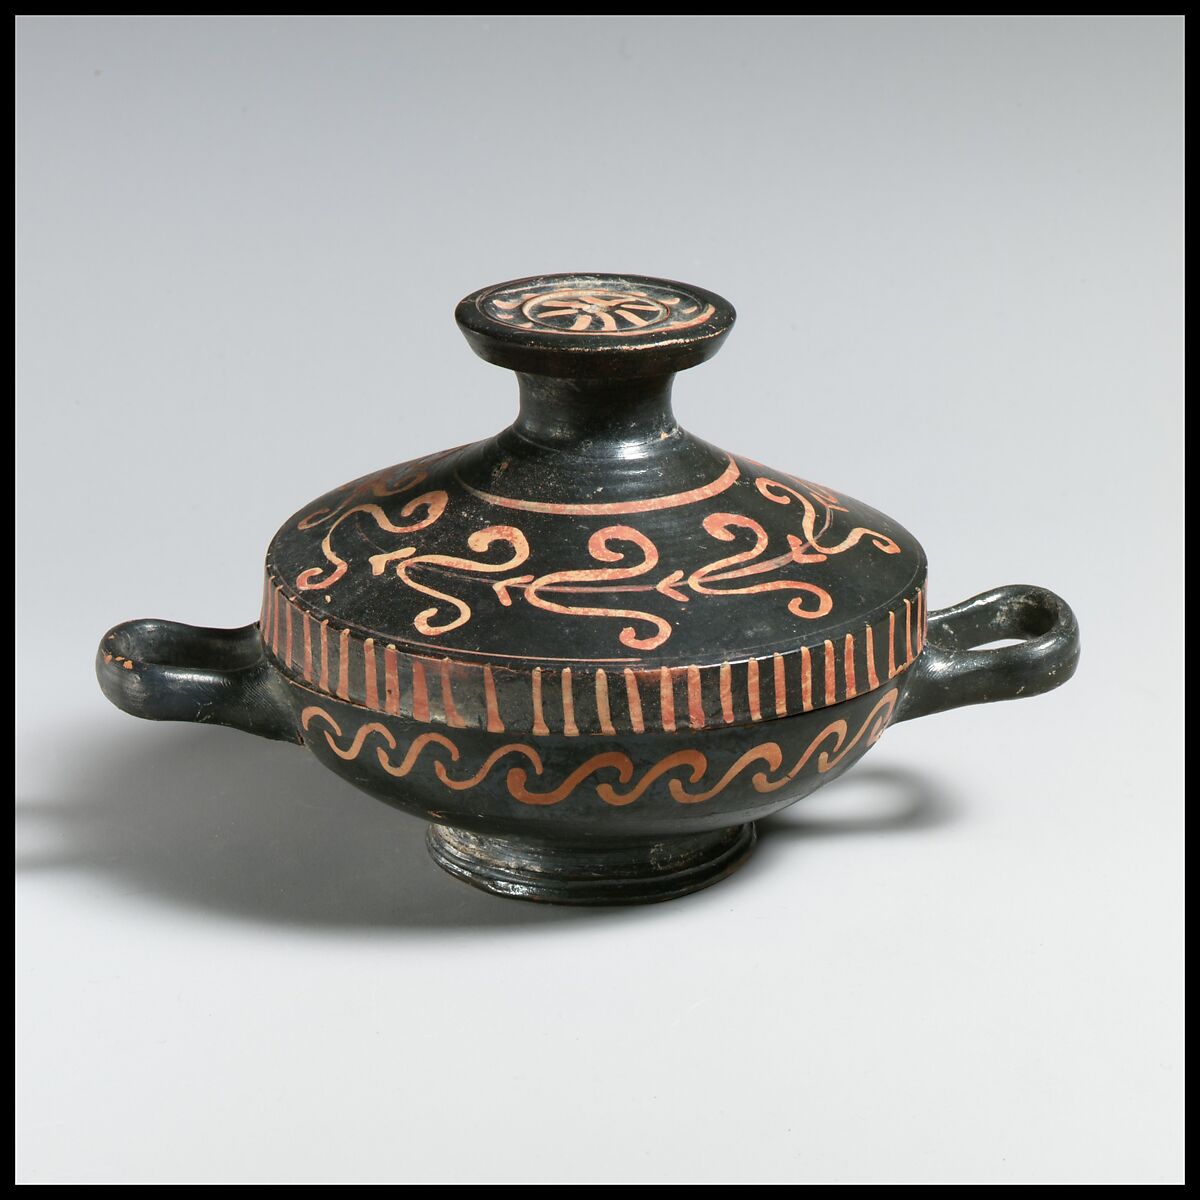 Lekanis with lid, Attributed to the Xenon Group, Terracotta, Greek, South Italian, Apulian 